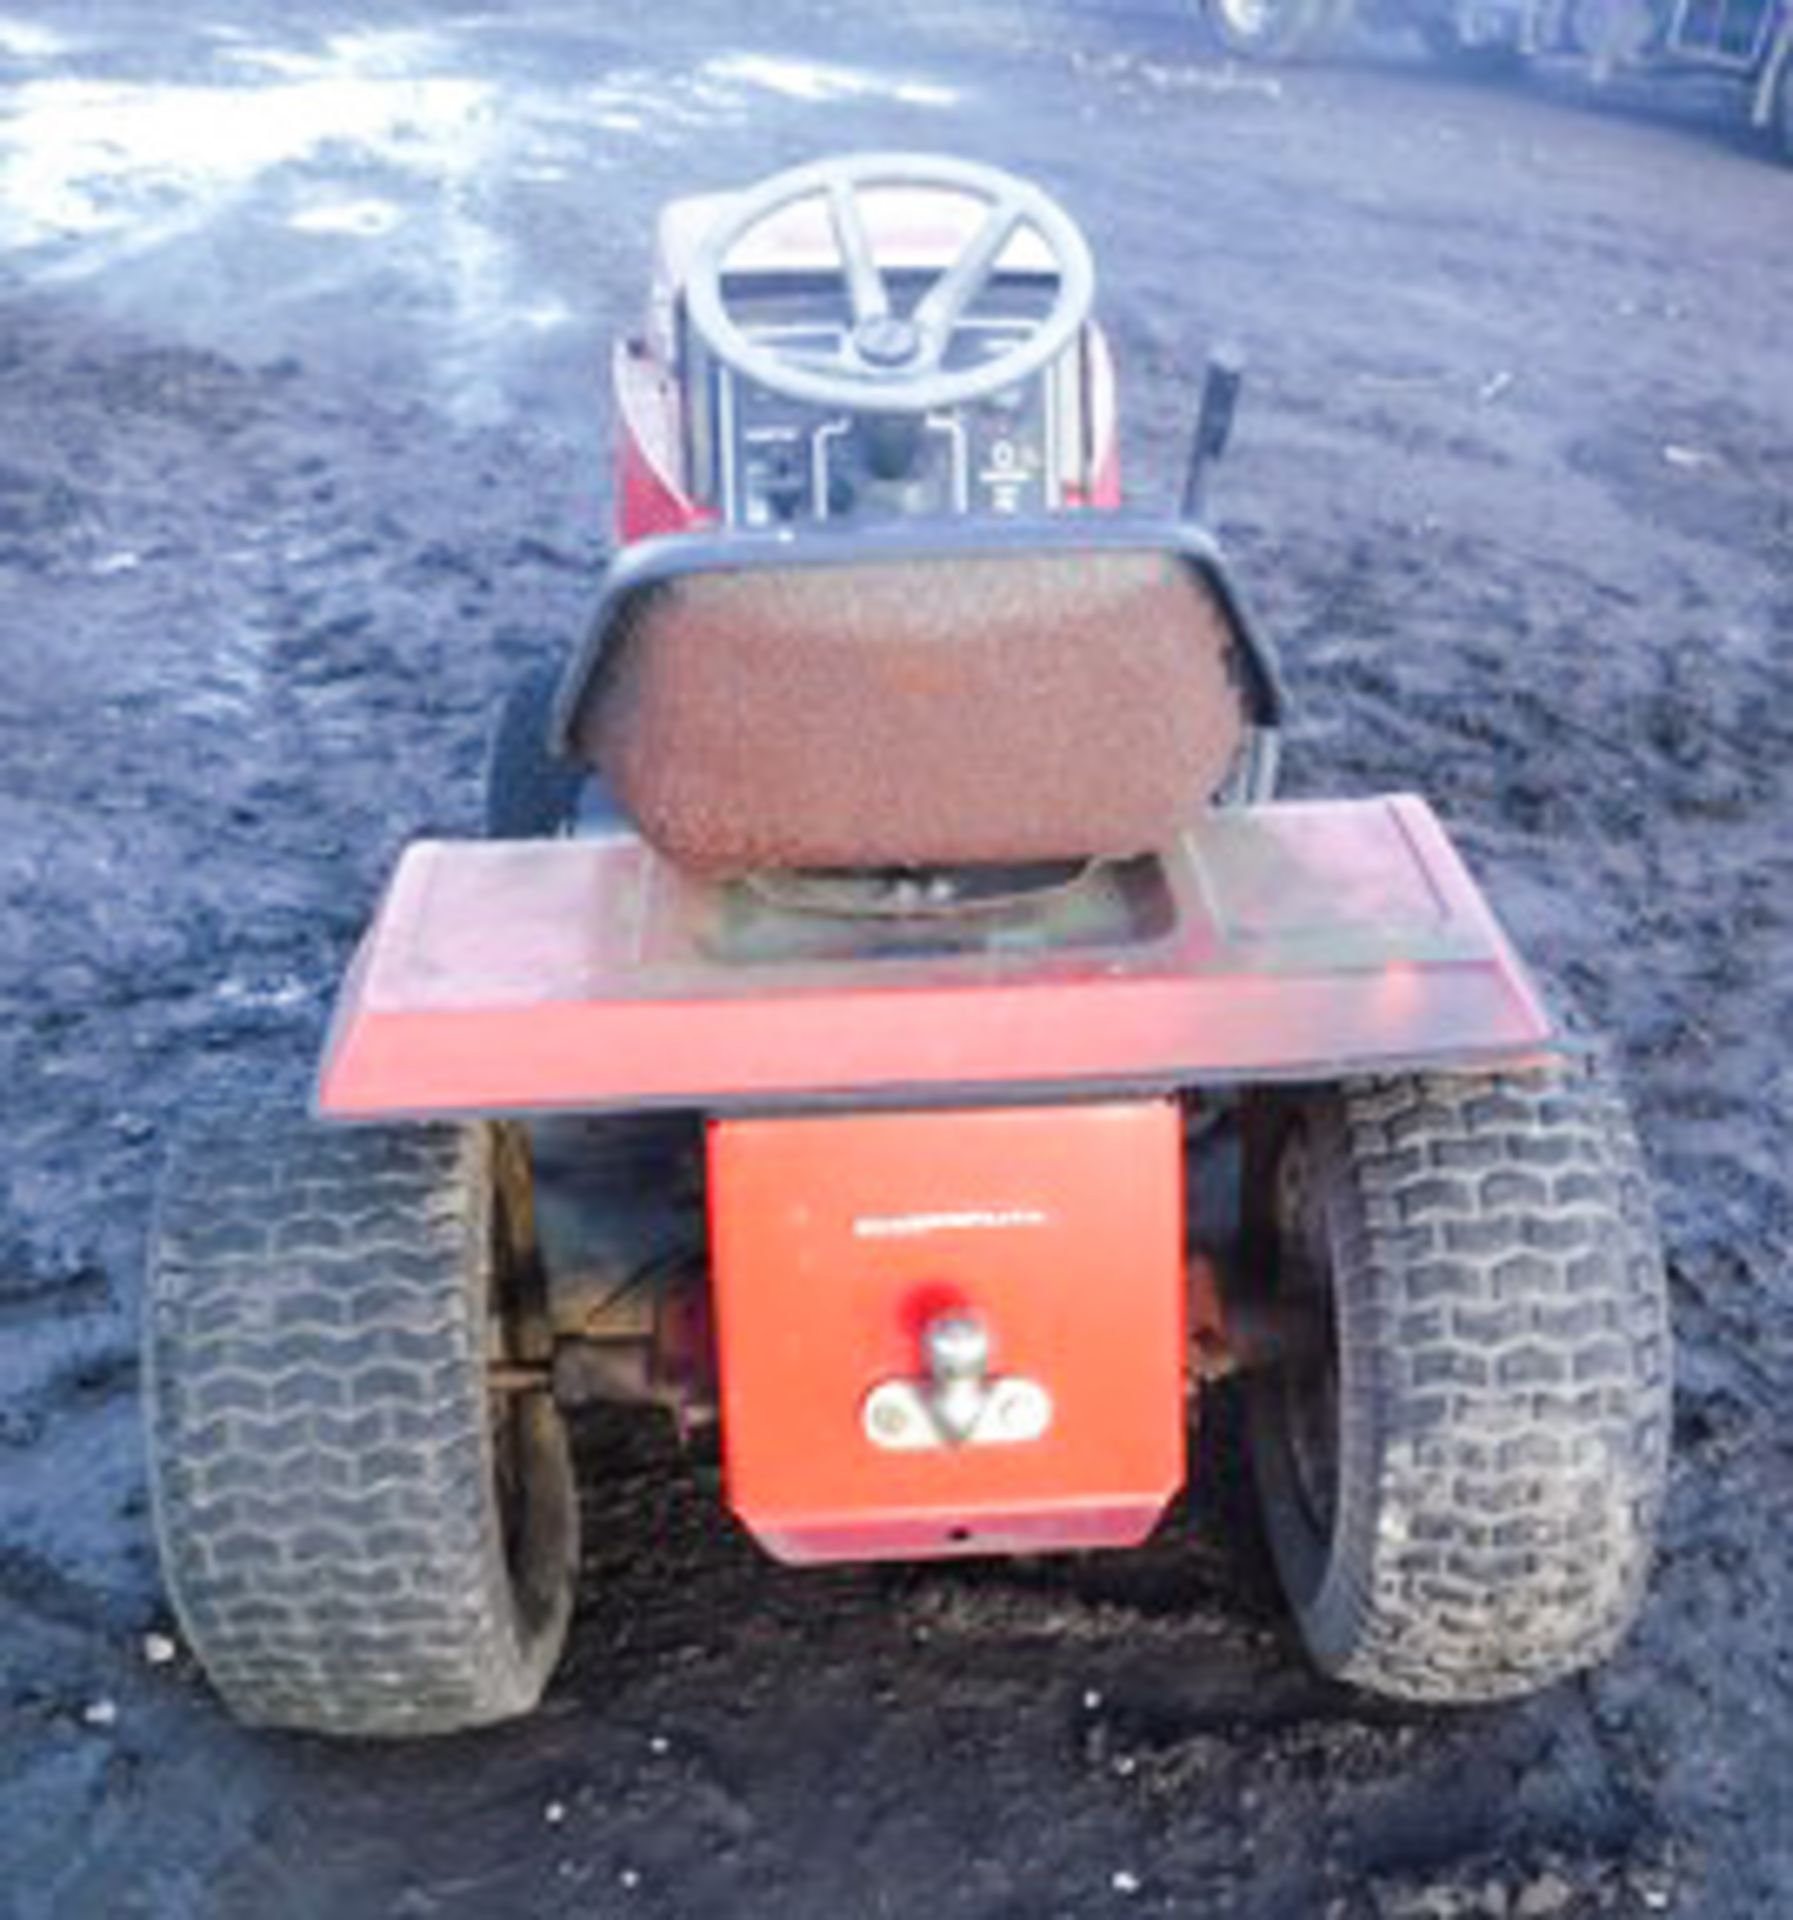 MTD LAWNFLITE RIDE ON MOWER. MODEL 828 18HP, 44" CUTTING DECK, SPARES OR REPAIRS - Image 2 of 5